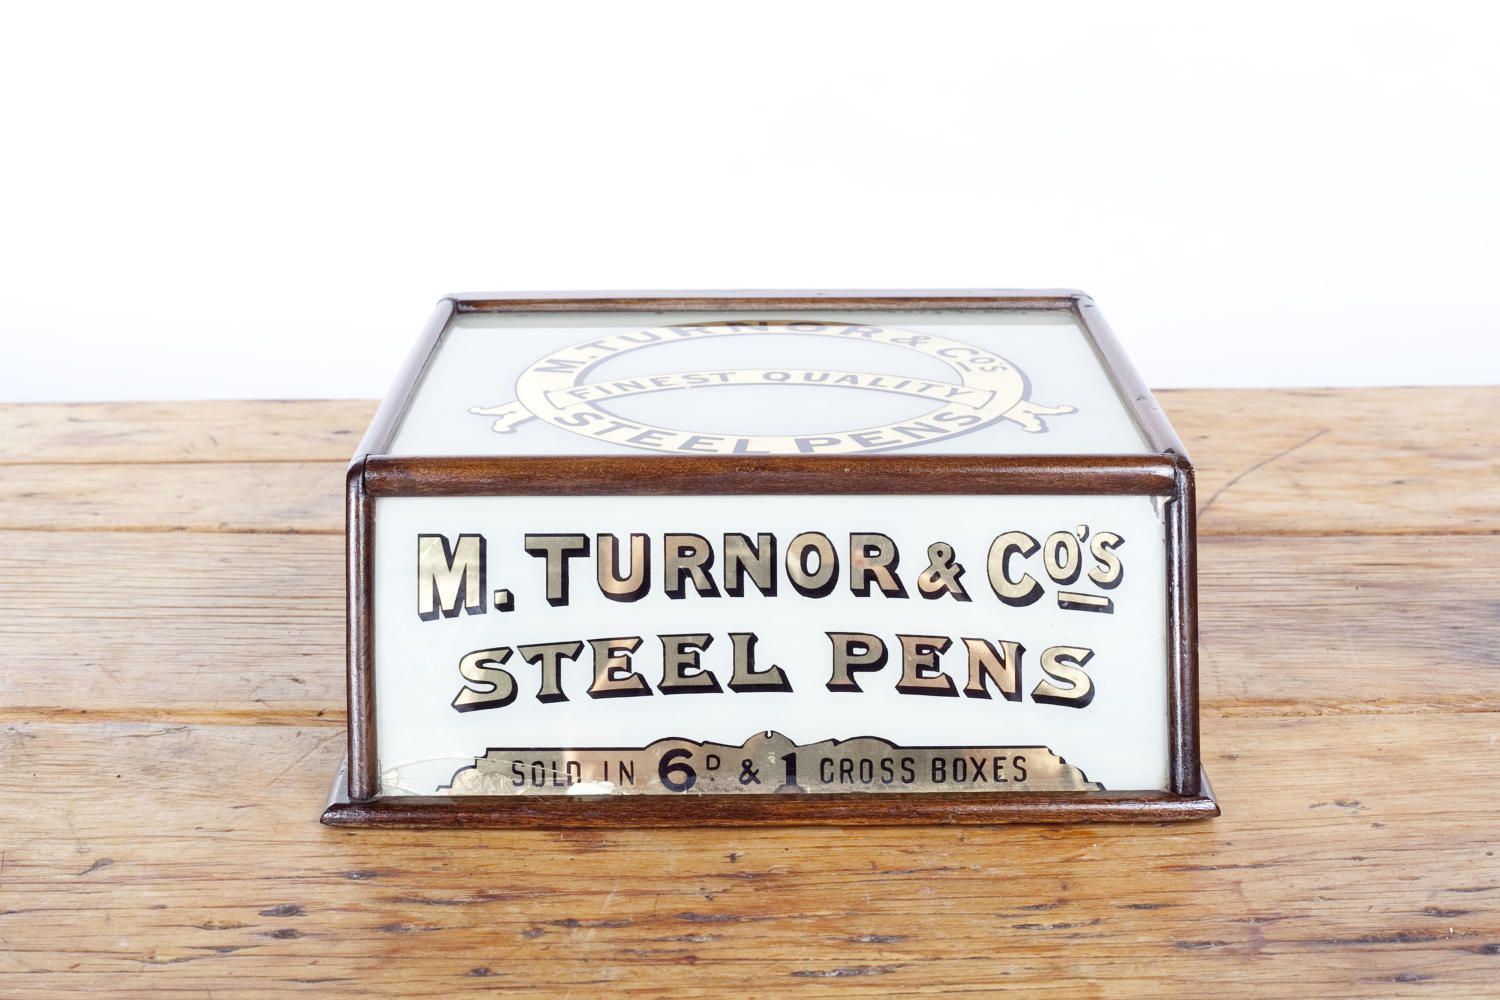 Early 20th century shop display cabinet for M Turnor & Co's Steel Pens